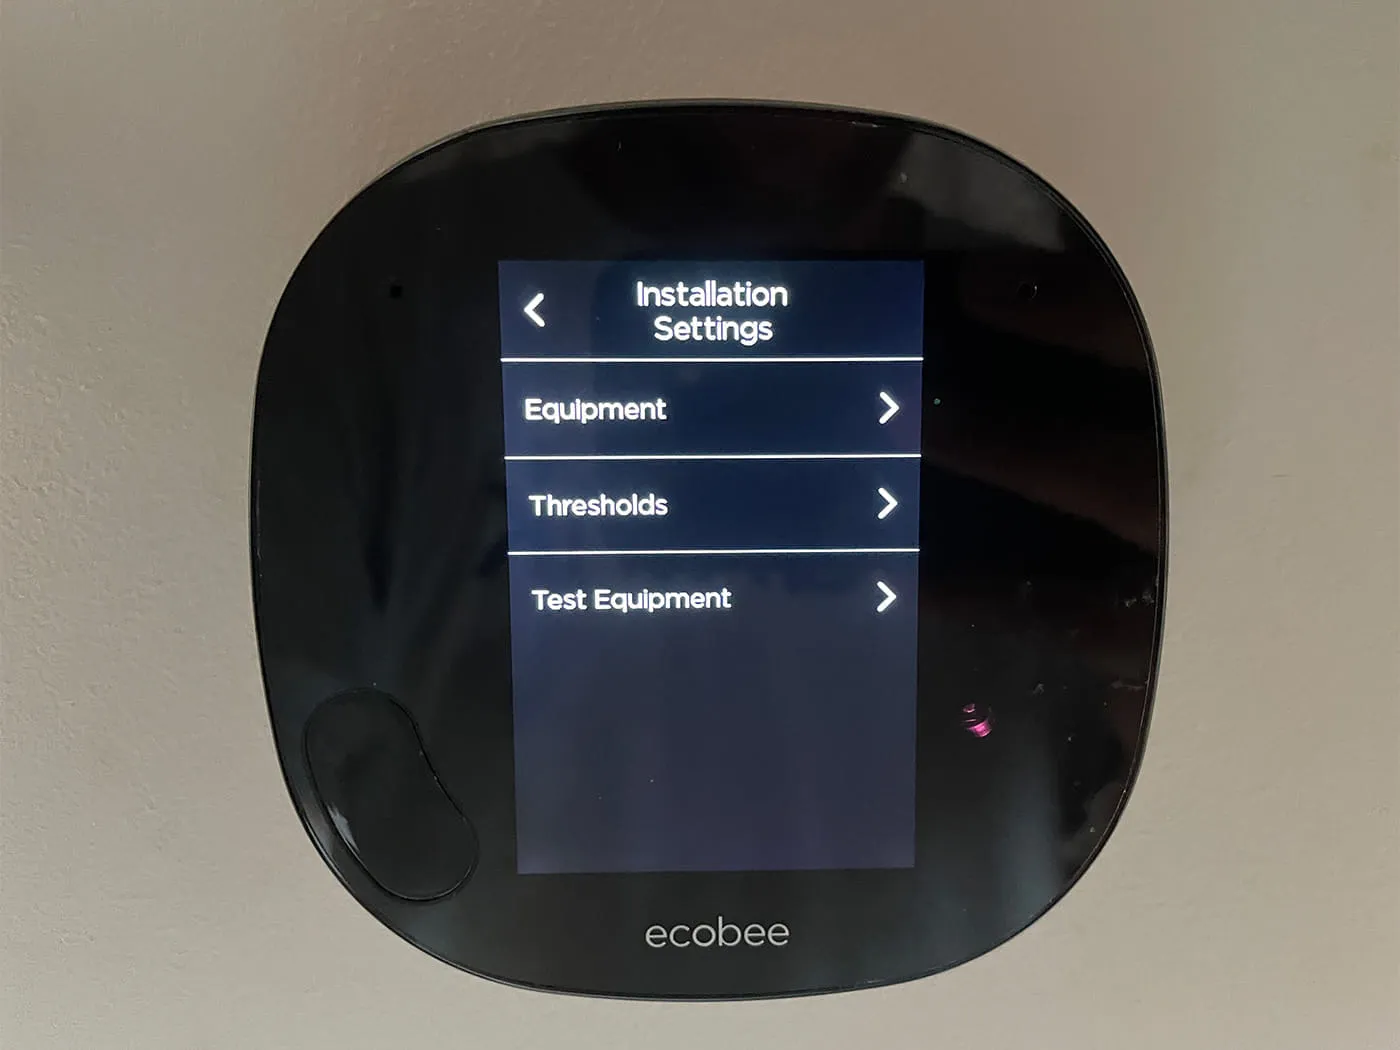 Ecobee thermostat Installation Settings screen